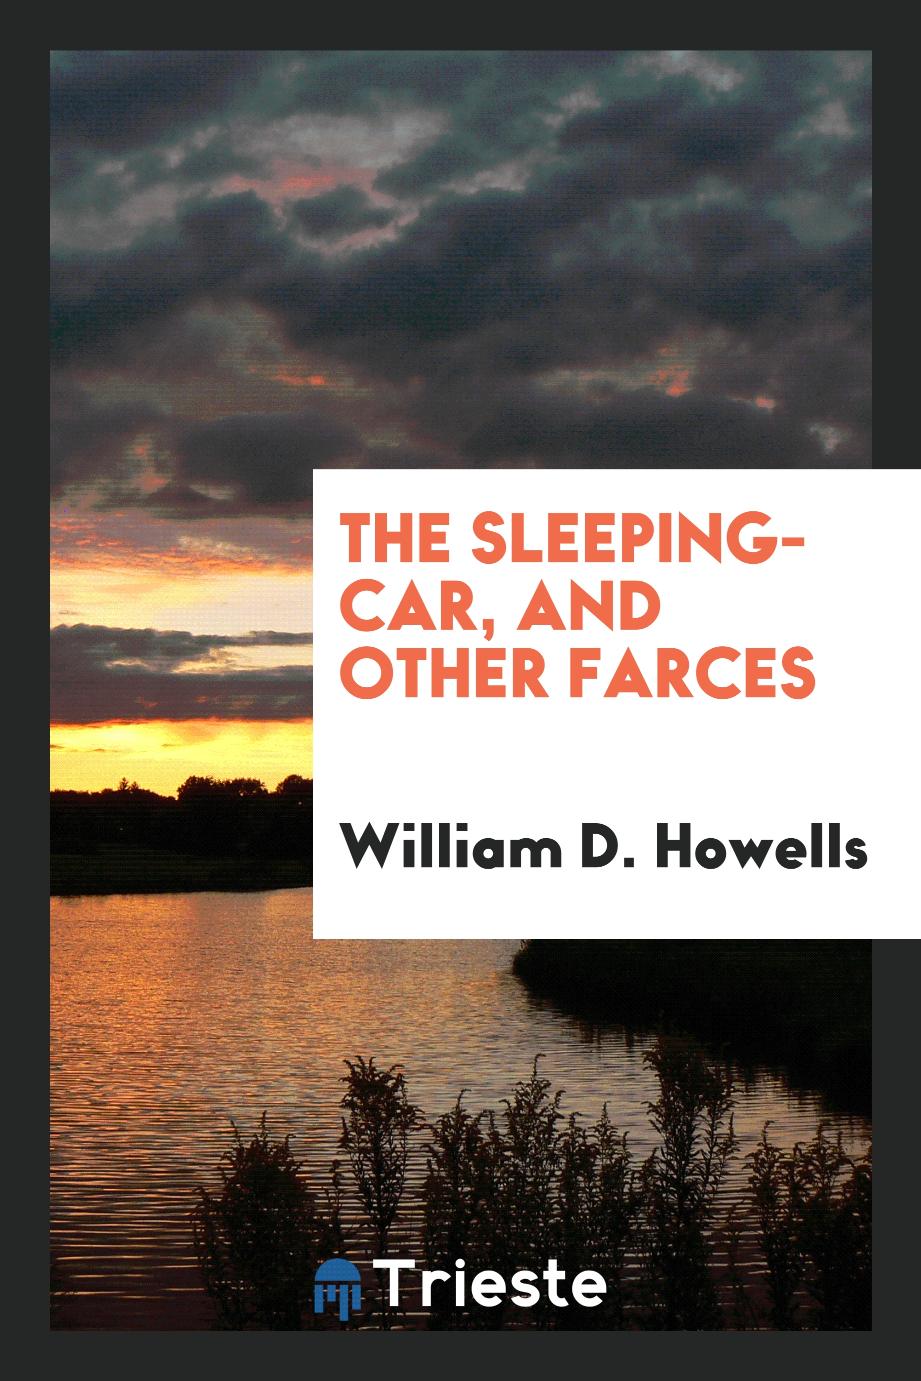 The sleeping-car, and other farces